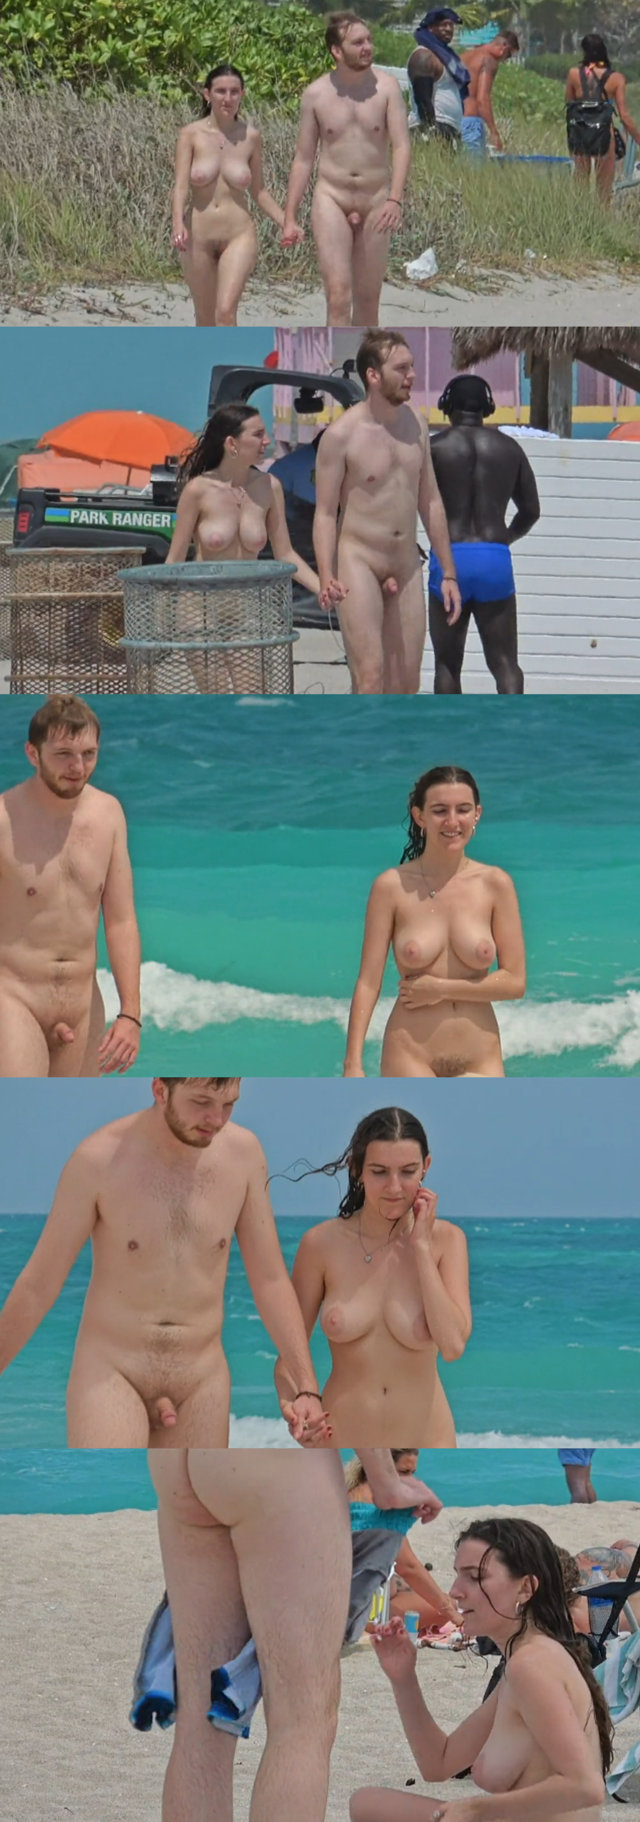 straight guy caught naked at the nudist beach with his girlfriend